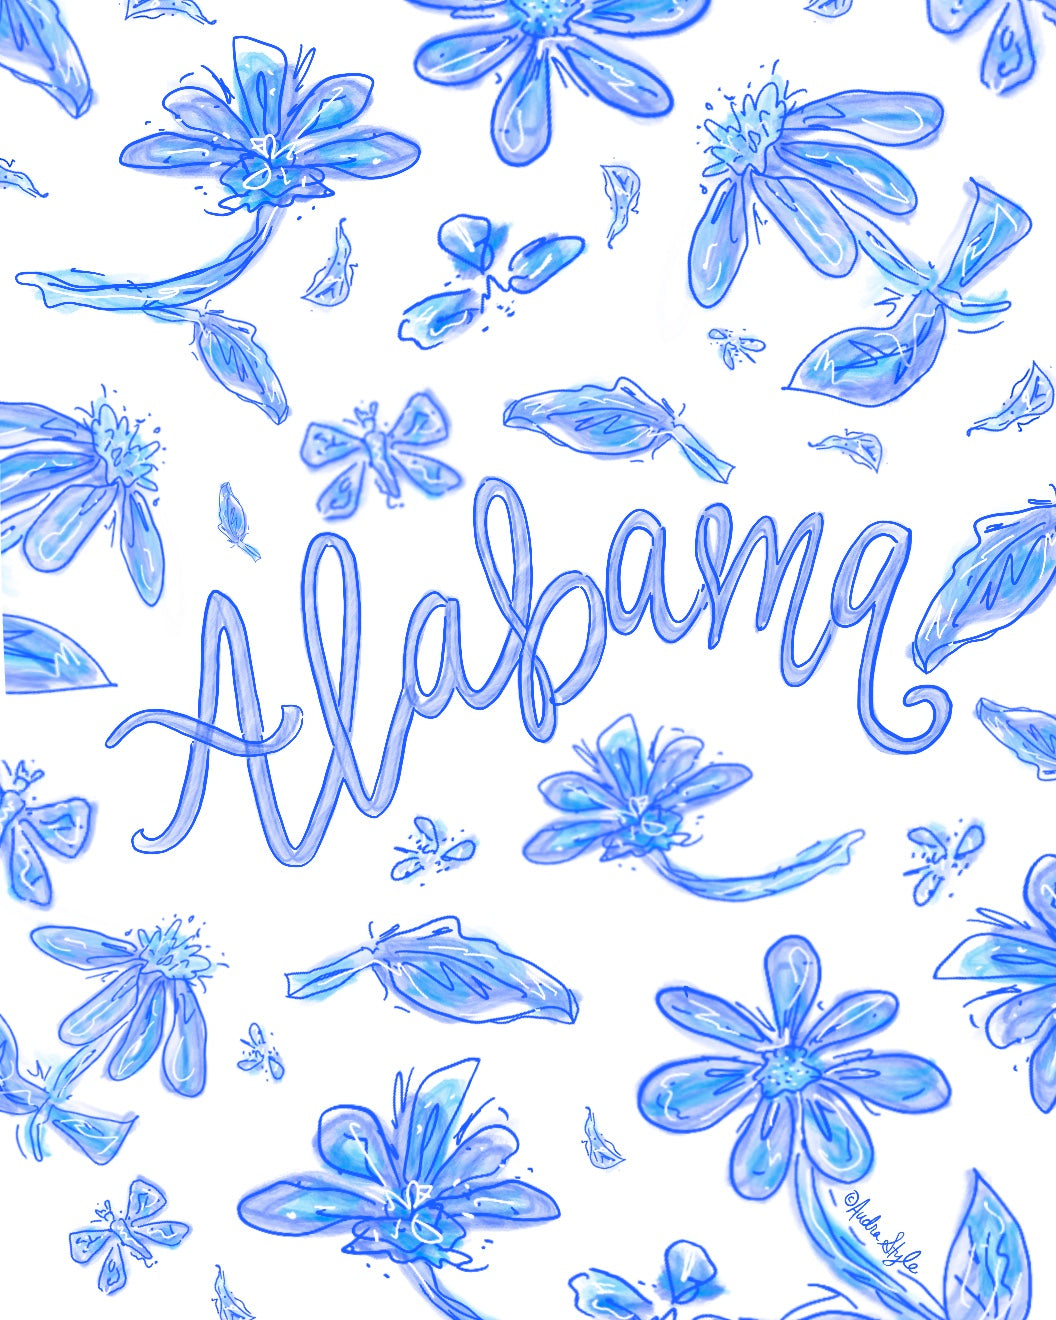 Blue and White Alabama Floral Reproduction Print